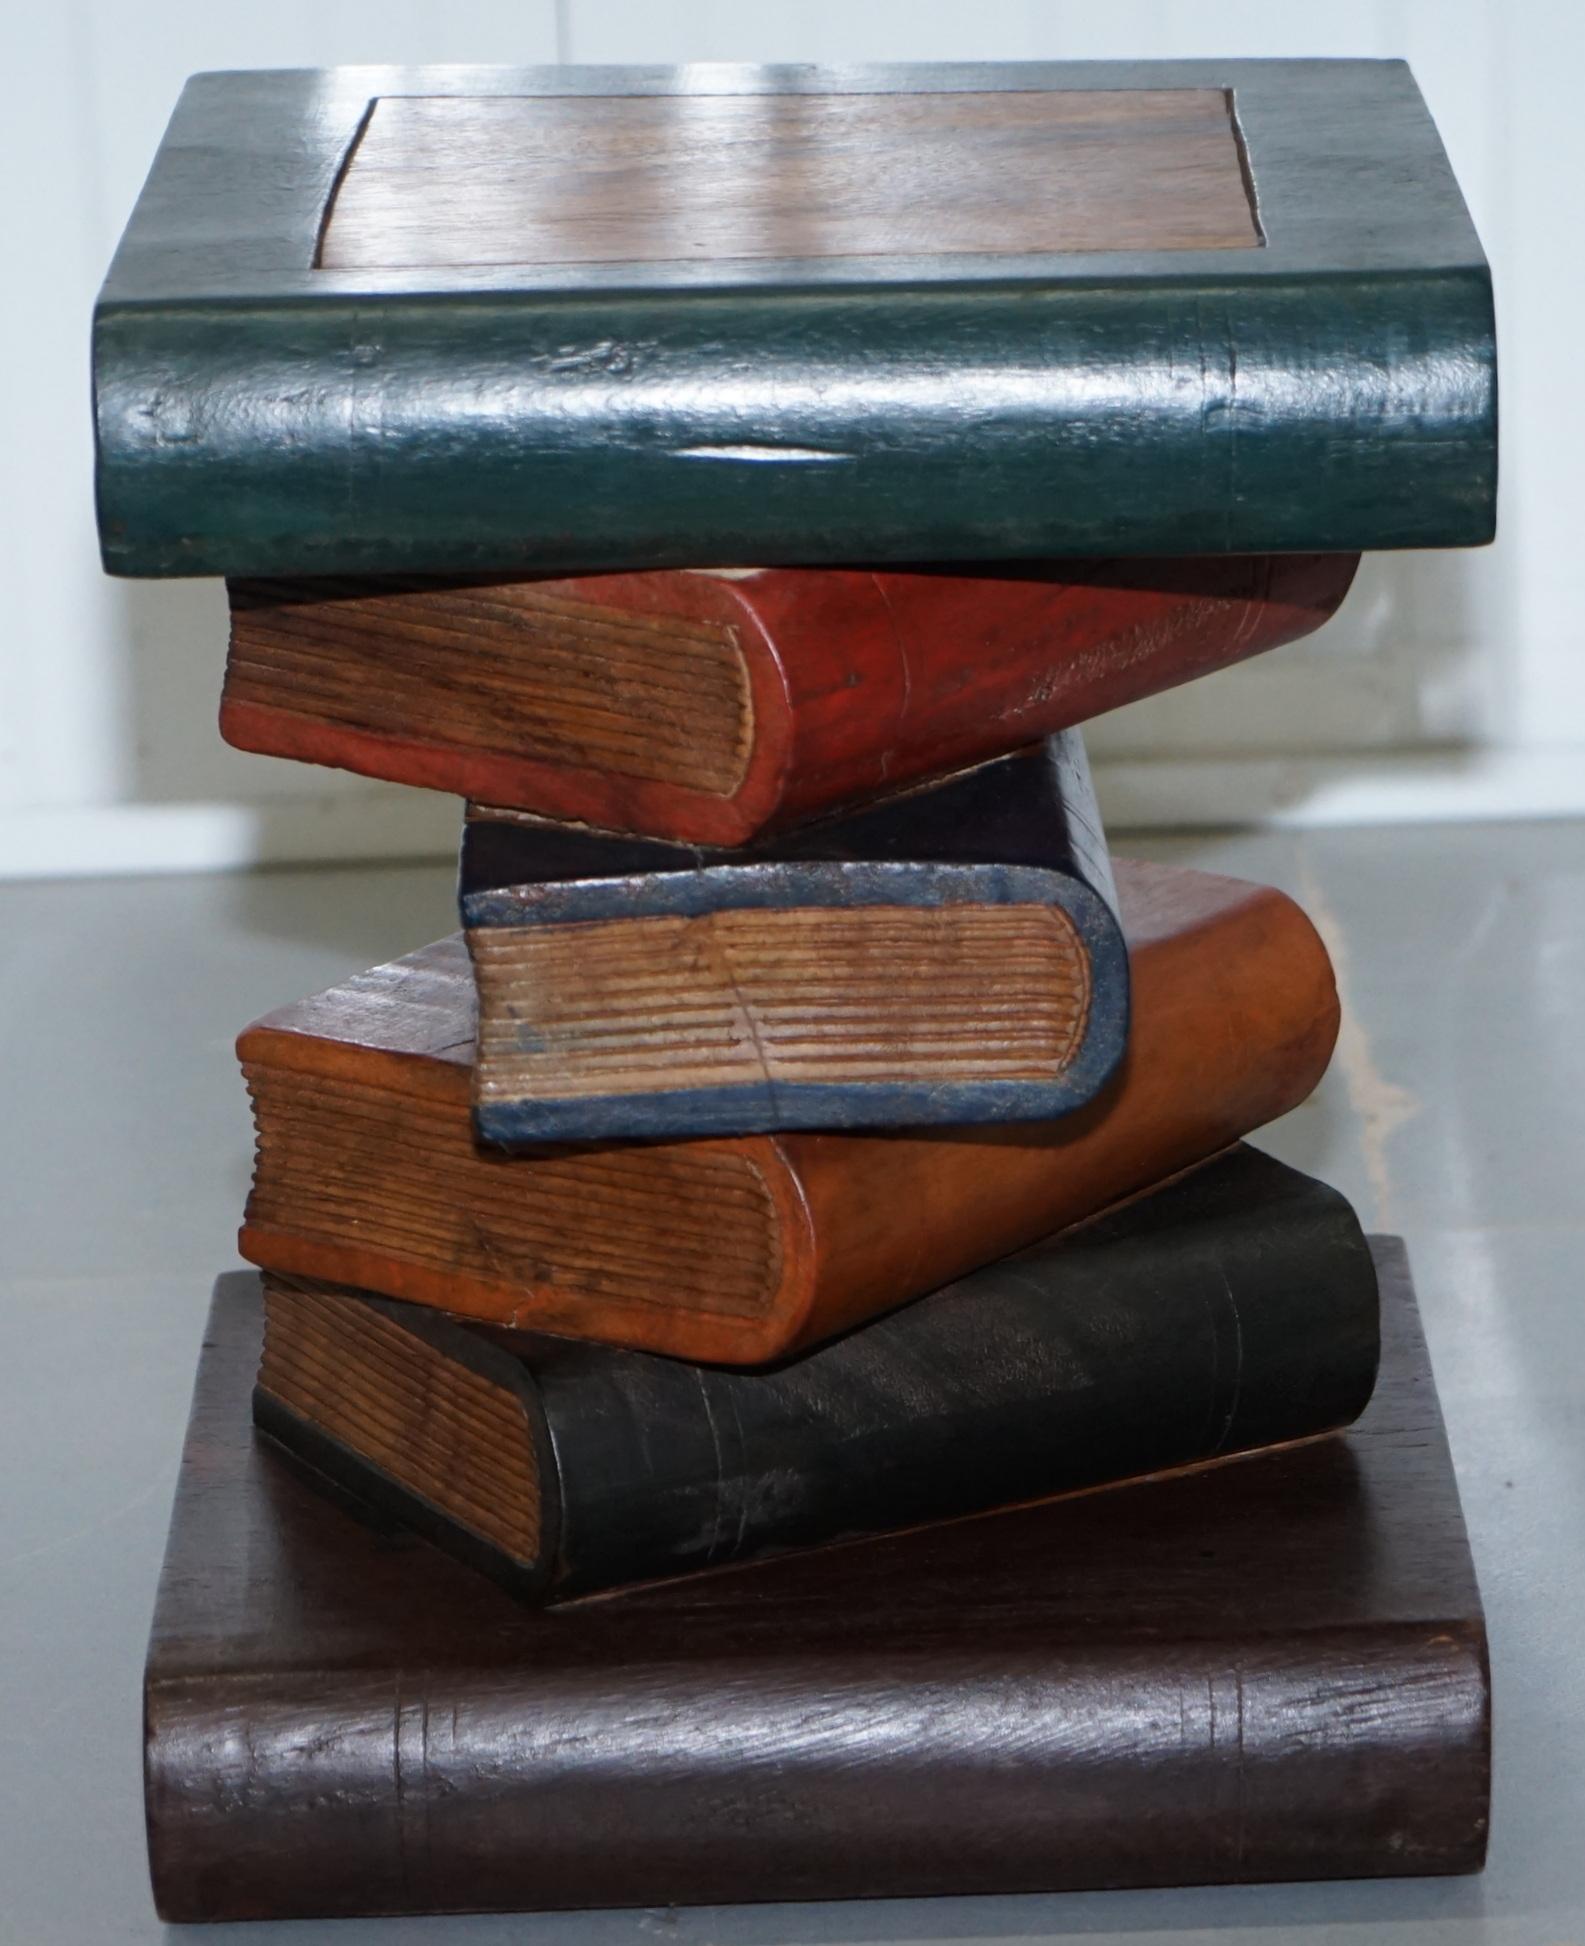 stacked books table lamp